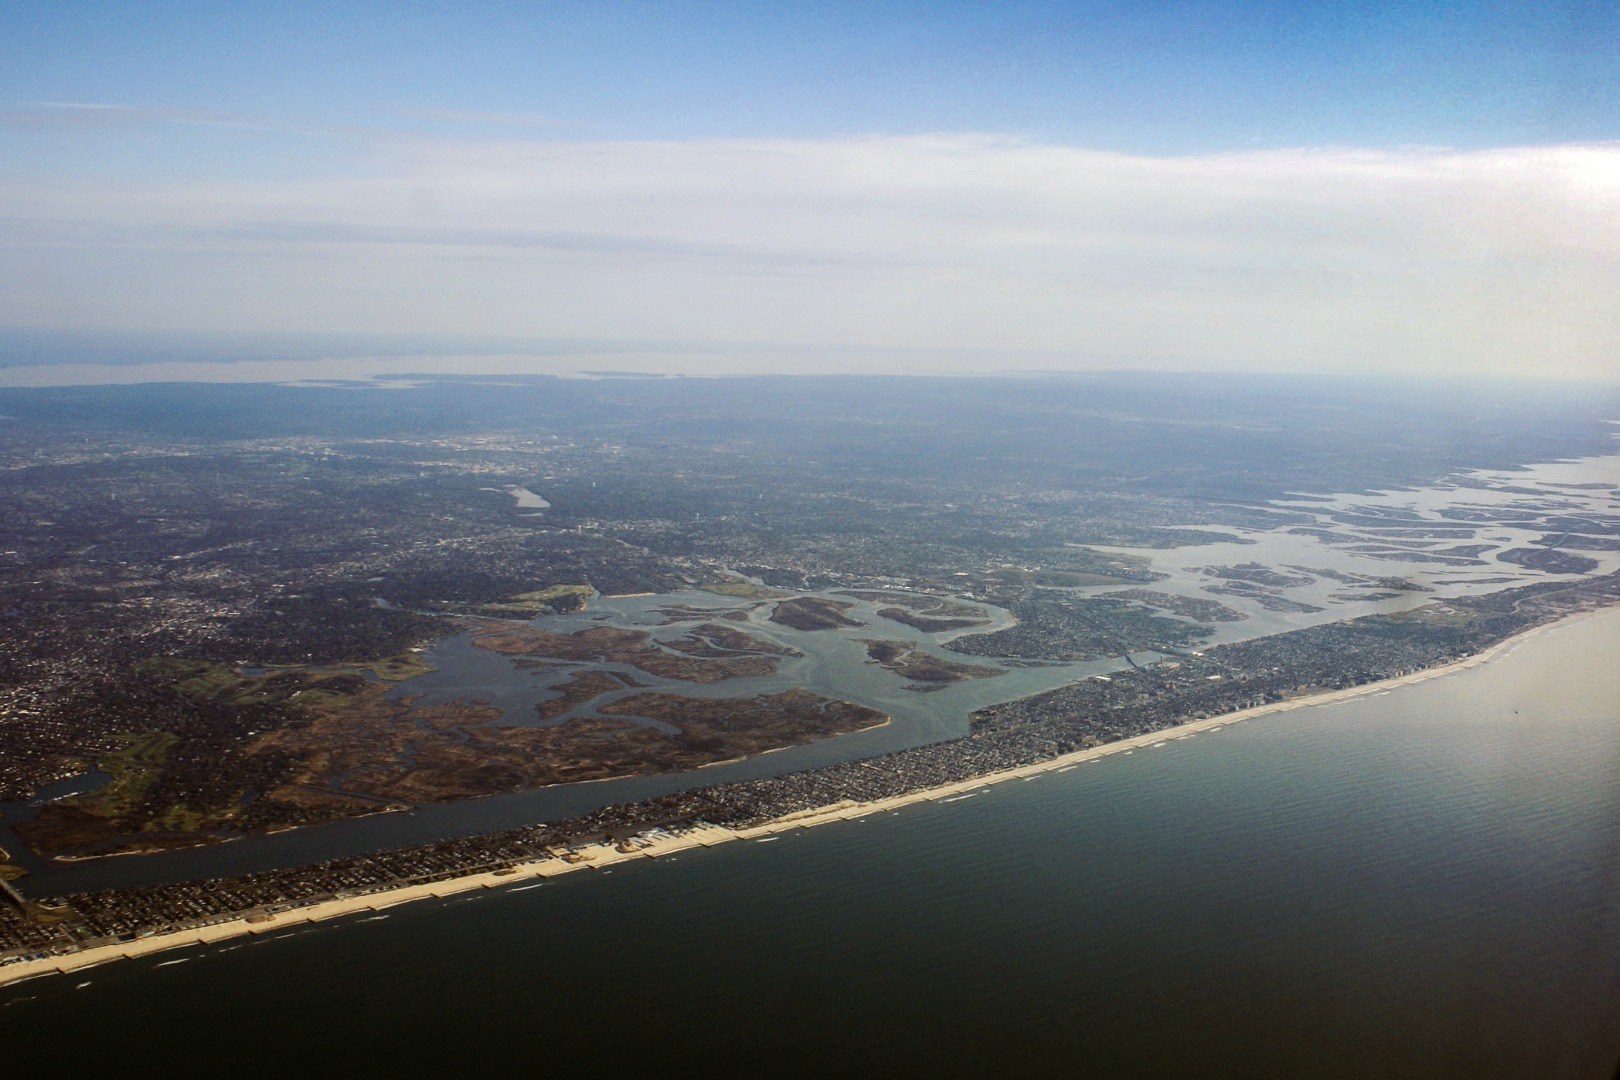 view of long island from above